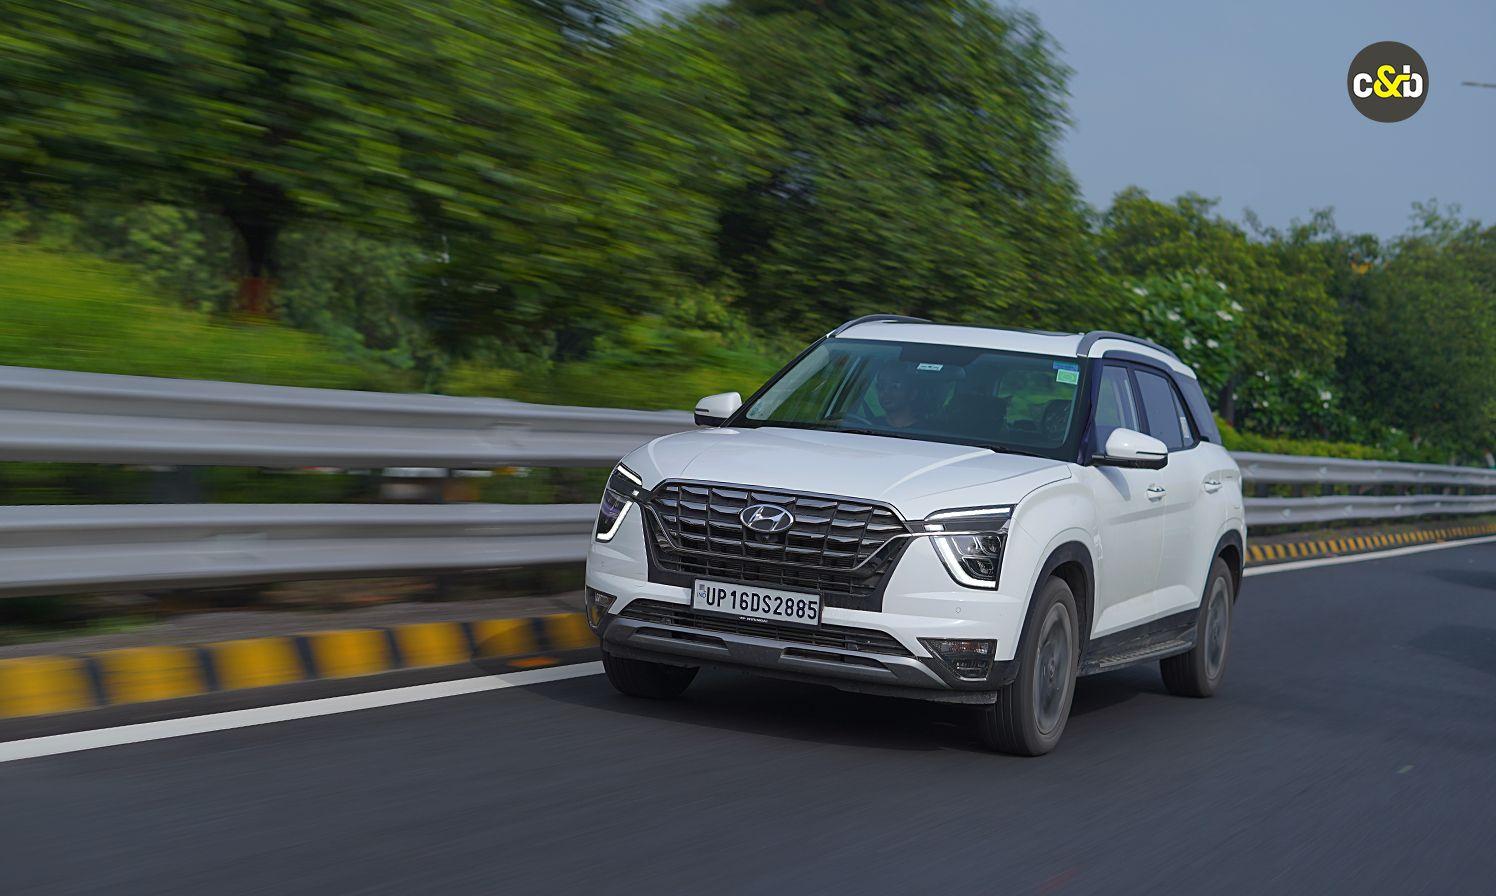 The only 7-seater in the Hyundai lineup gets a 1.5-litre unit instead of the bigger 2.0-litre unit! Is that a bad thing?